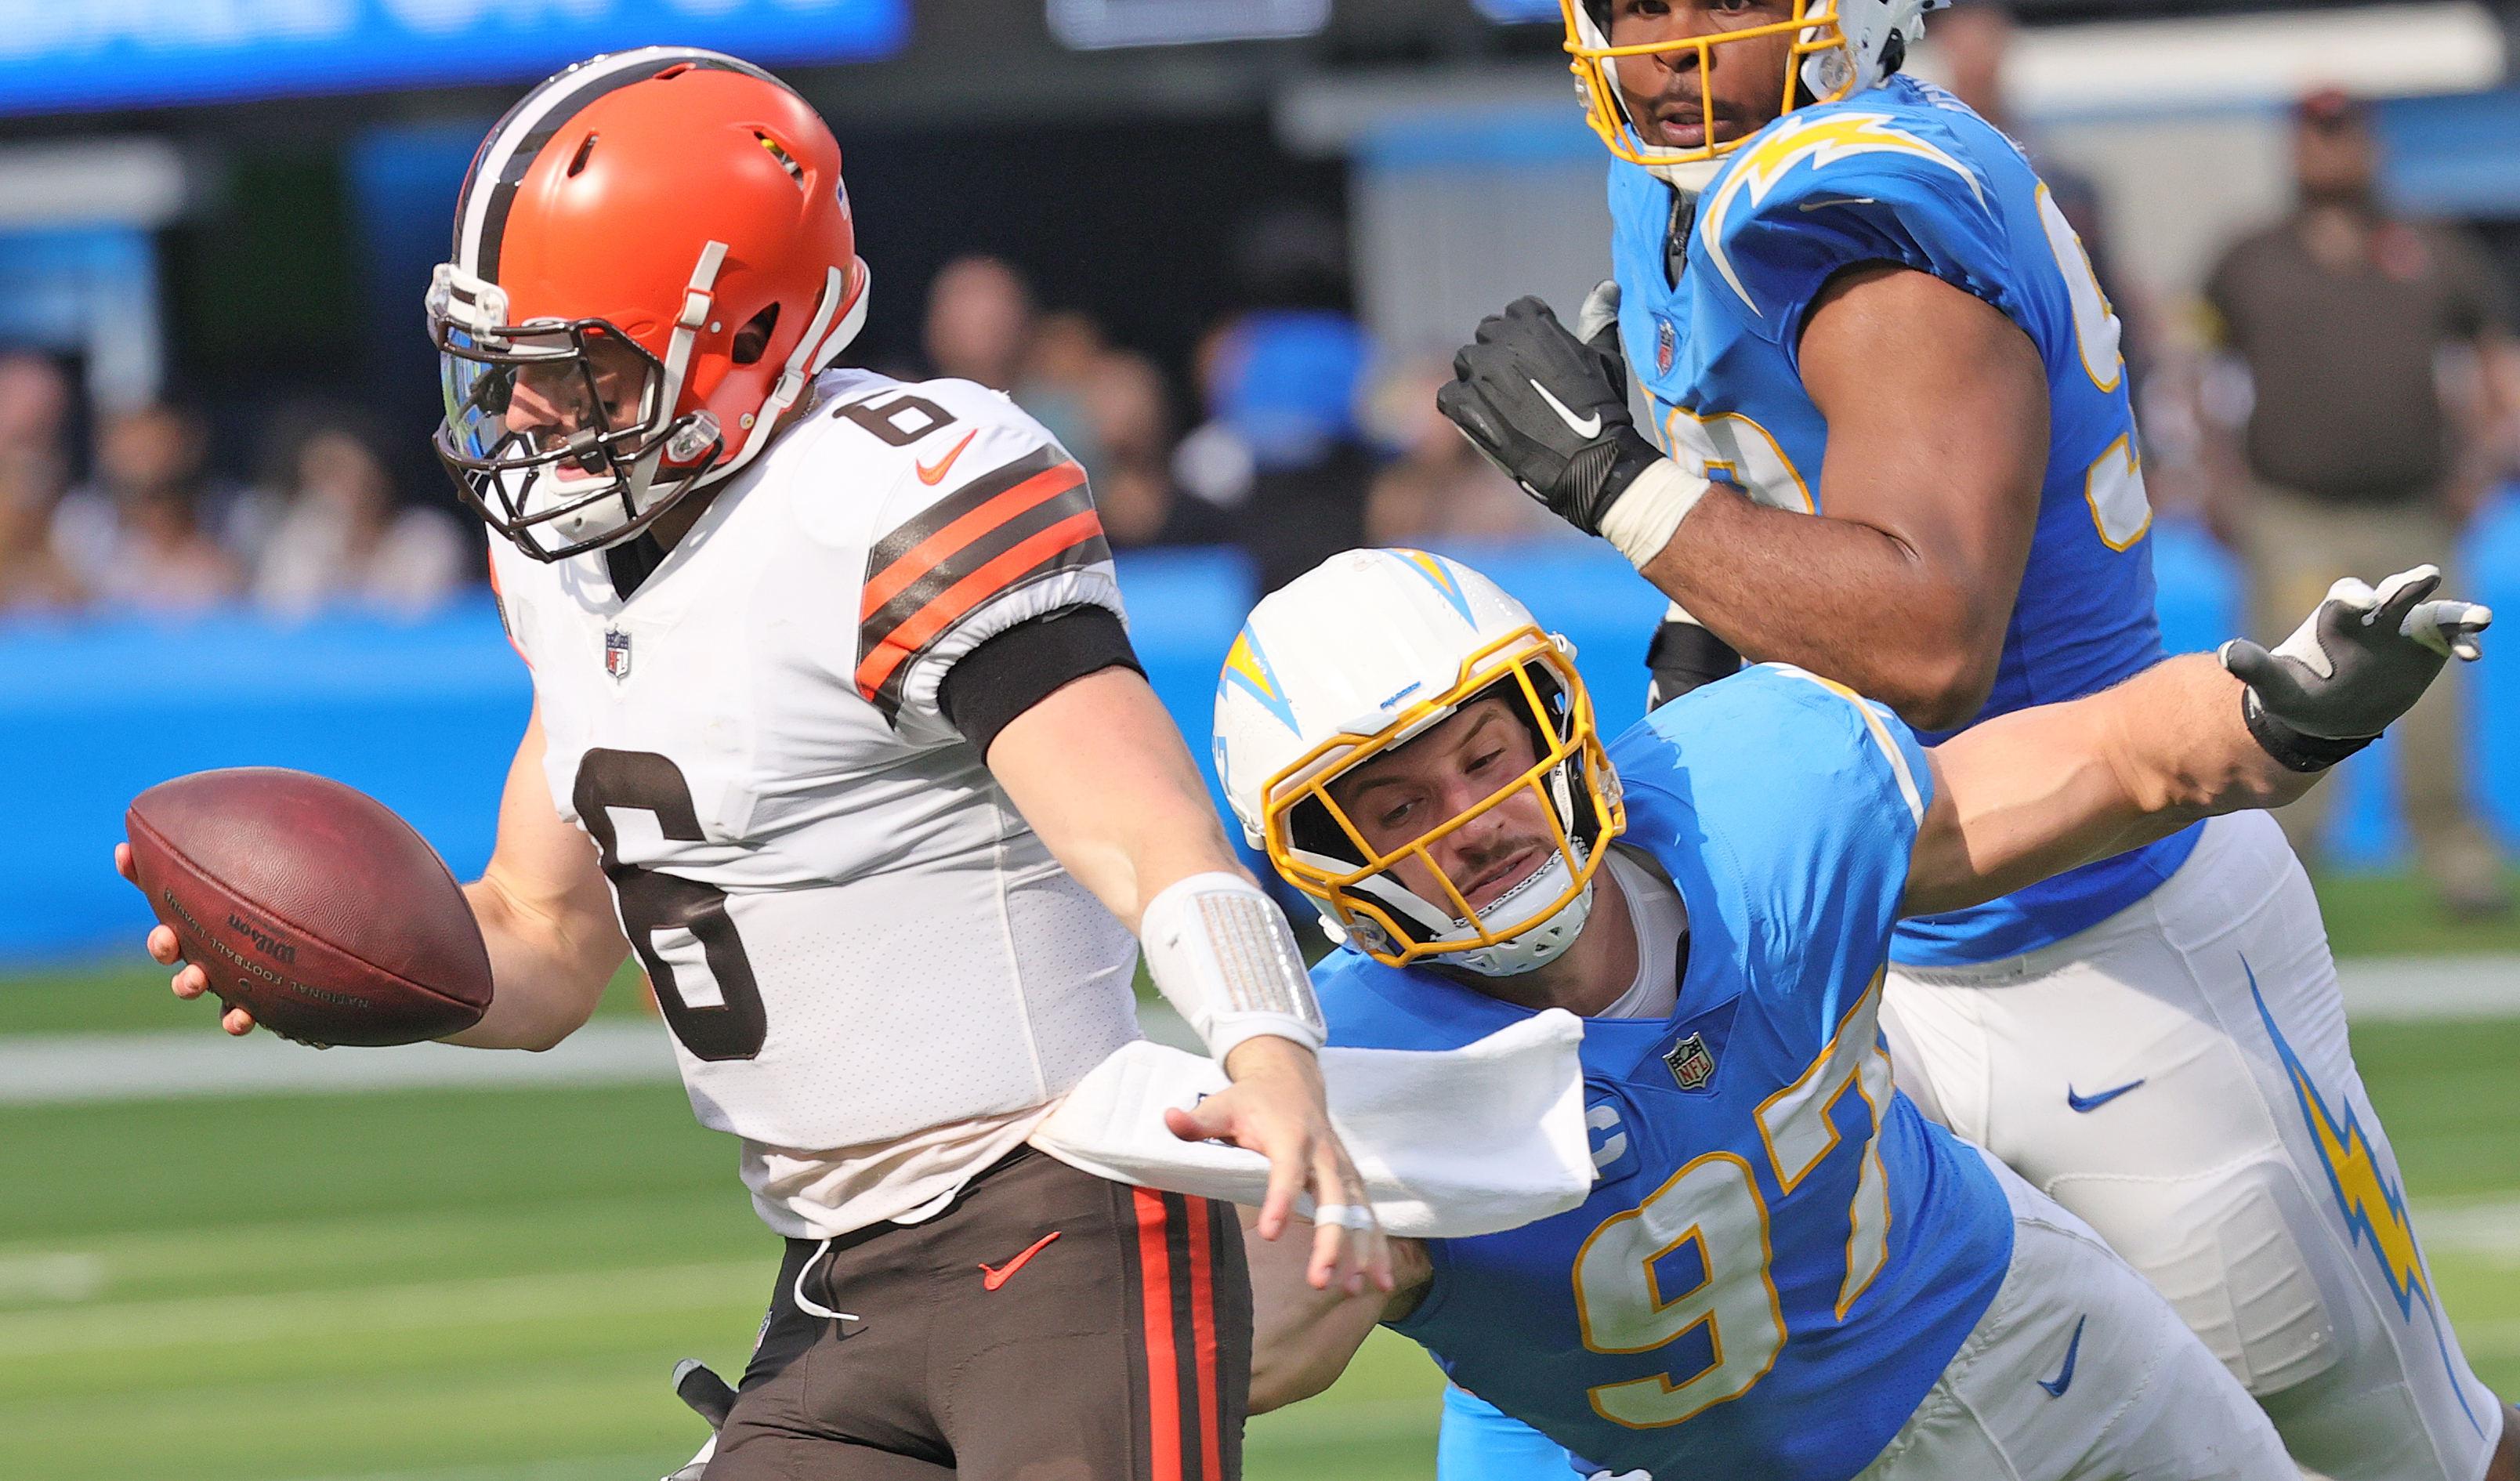 Cleveland Browns Baker Mayfield vs. Los Angeles Chargers, October